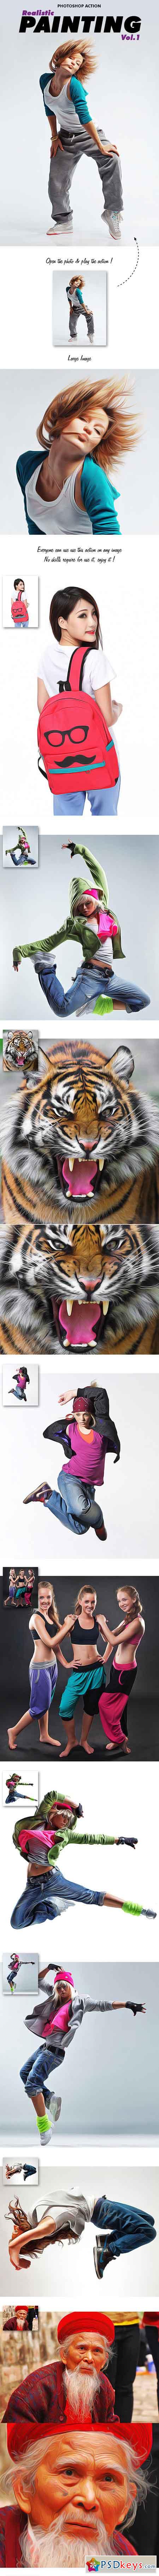 Realistic Painting Vol.1 - Photoshop Action 11549412